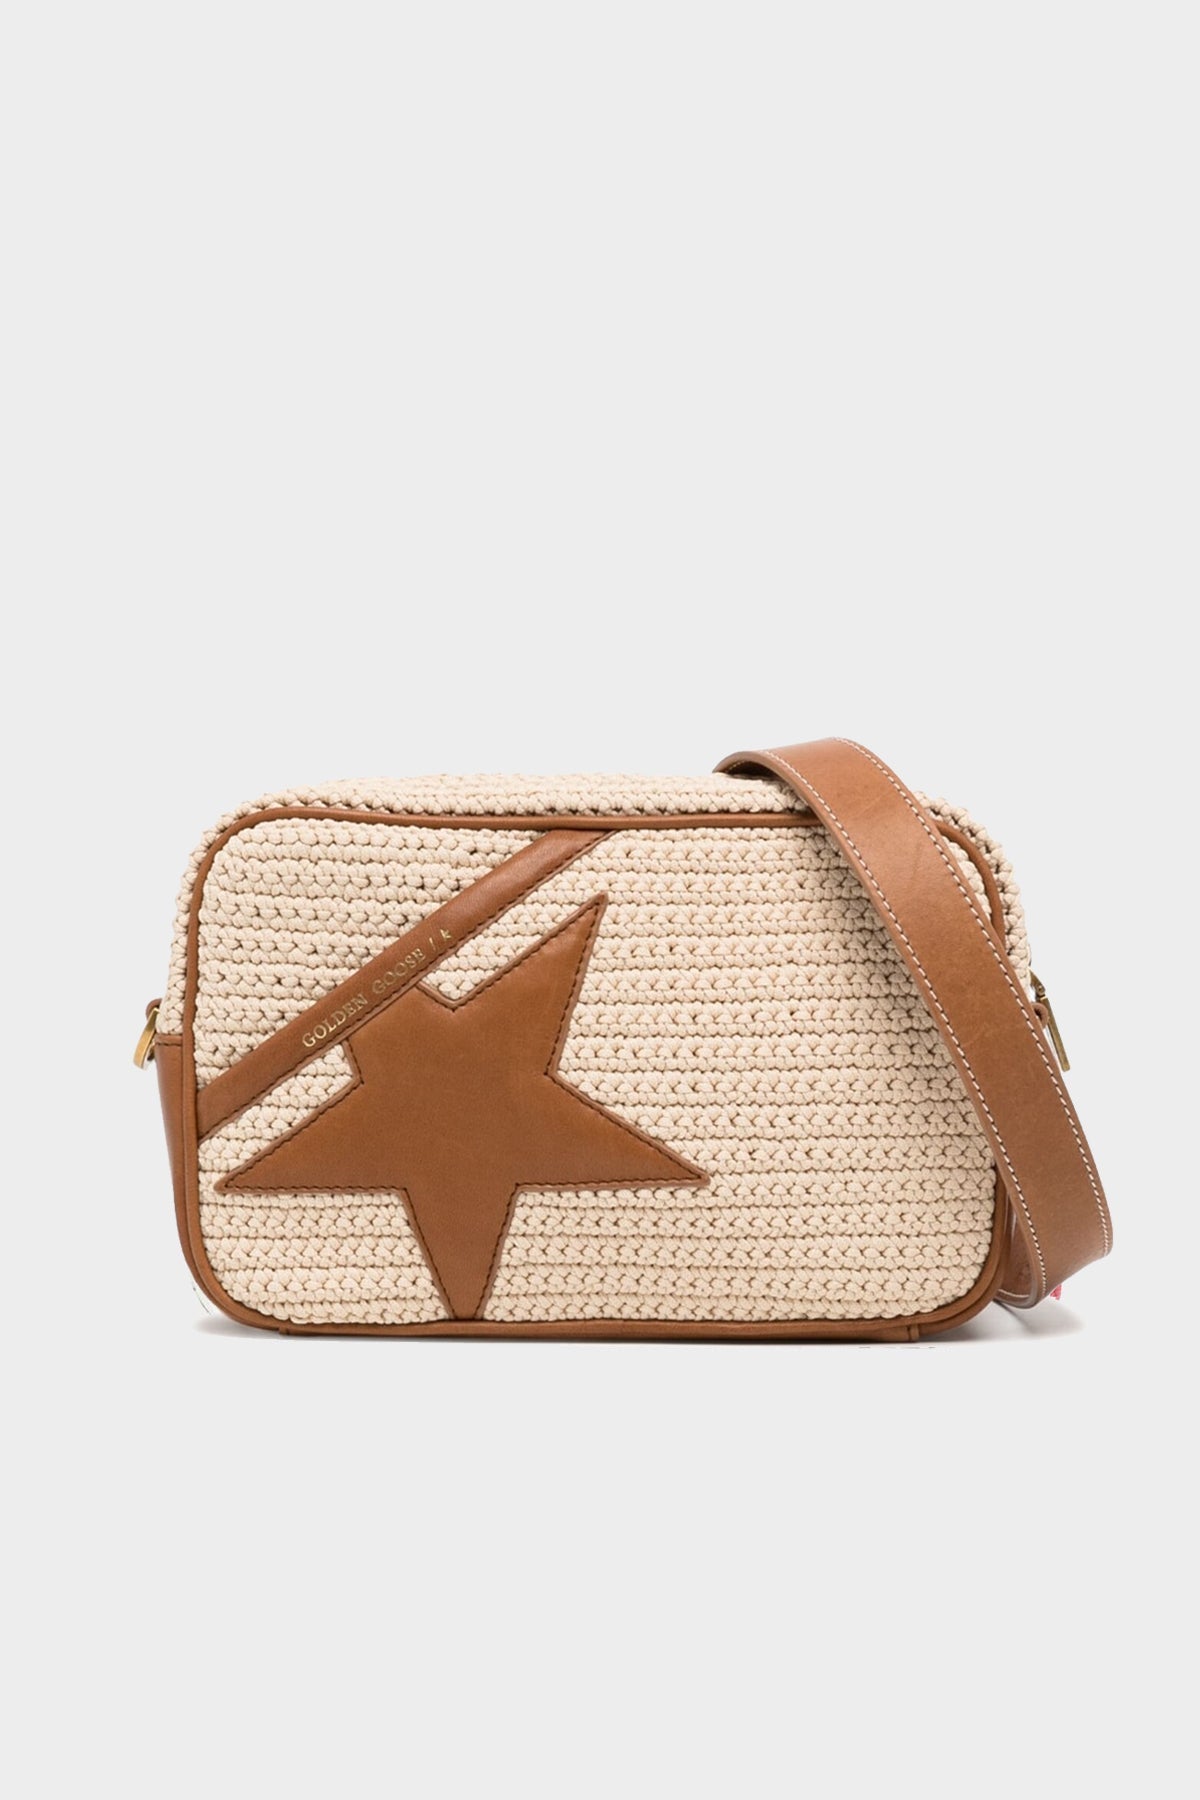 Star-Bag Crochet Body and Leather Shoulder Bag in Brown